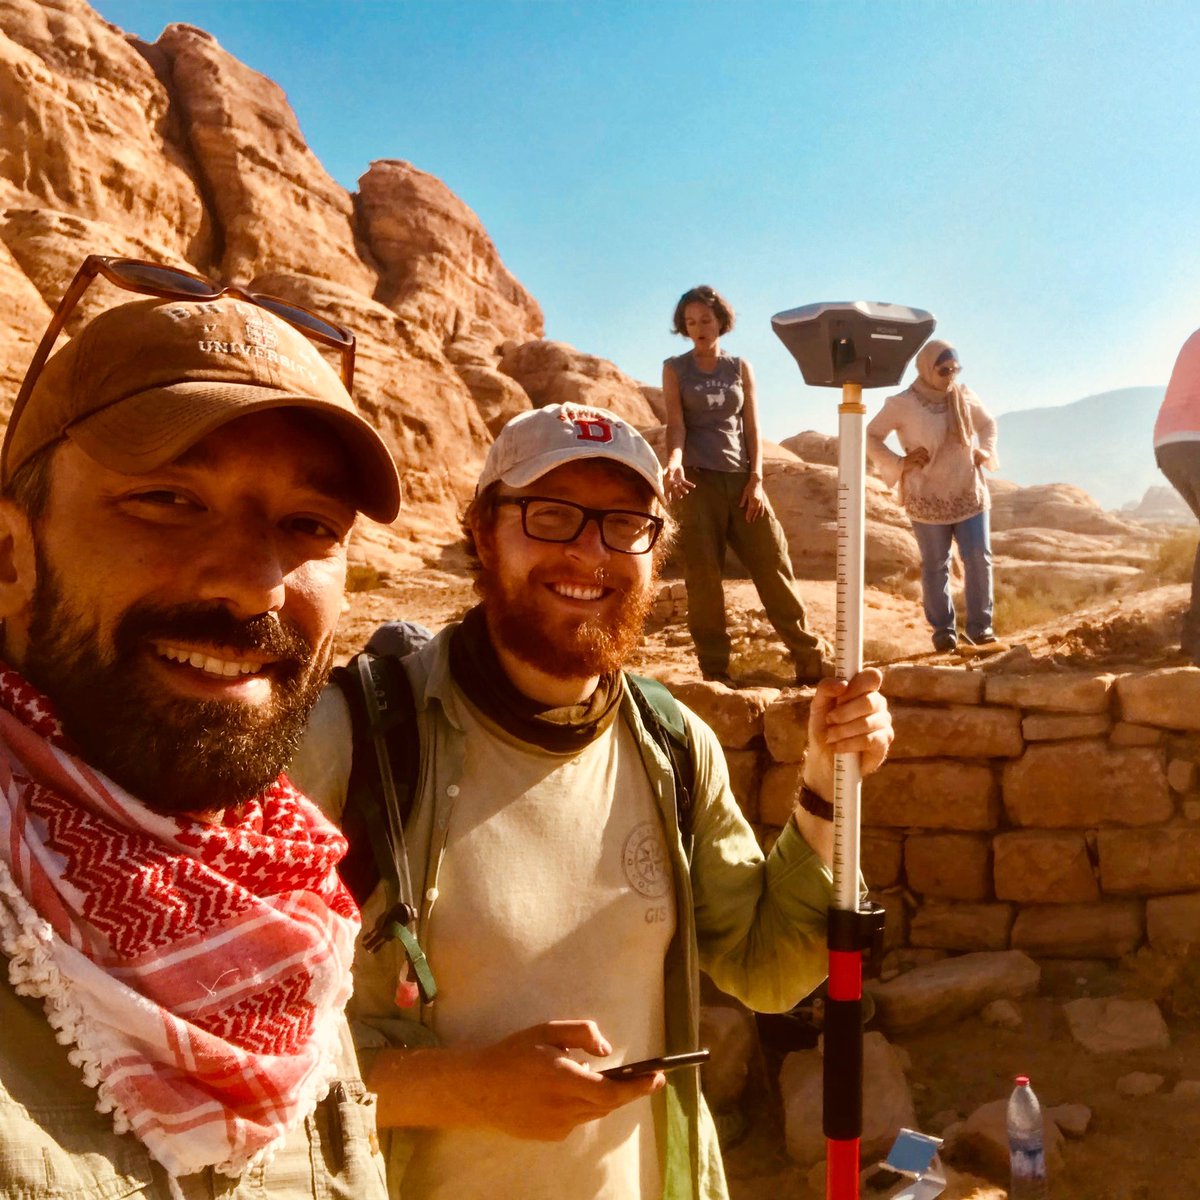 I also work at the amazing site of  #Petra, where our team from  @brownarchaeolog is documenting the agricultural infrastructure that allowed this city to flourish in the Nabataean and Roman periods! ~el 3/7